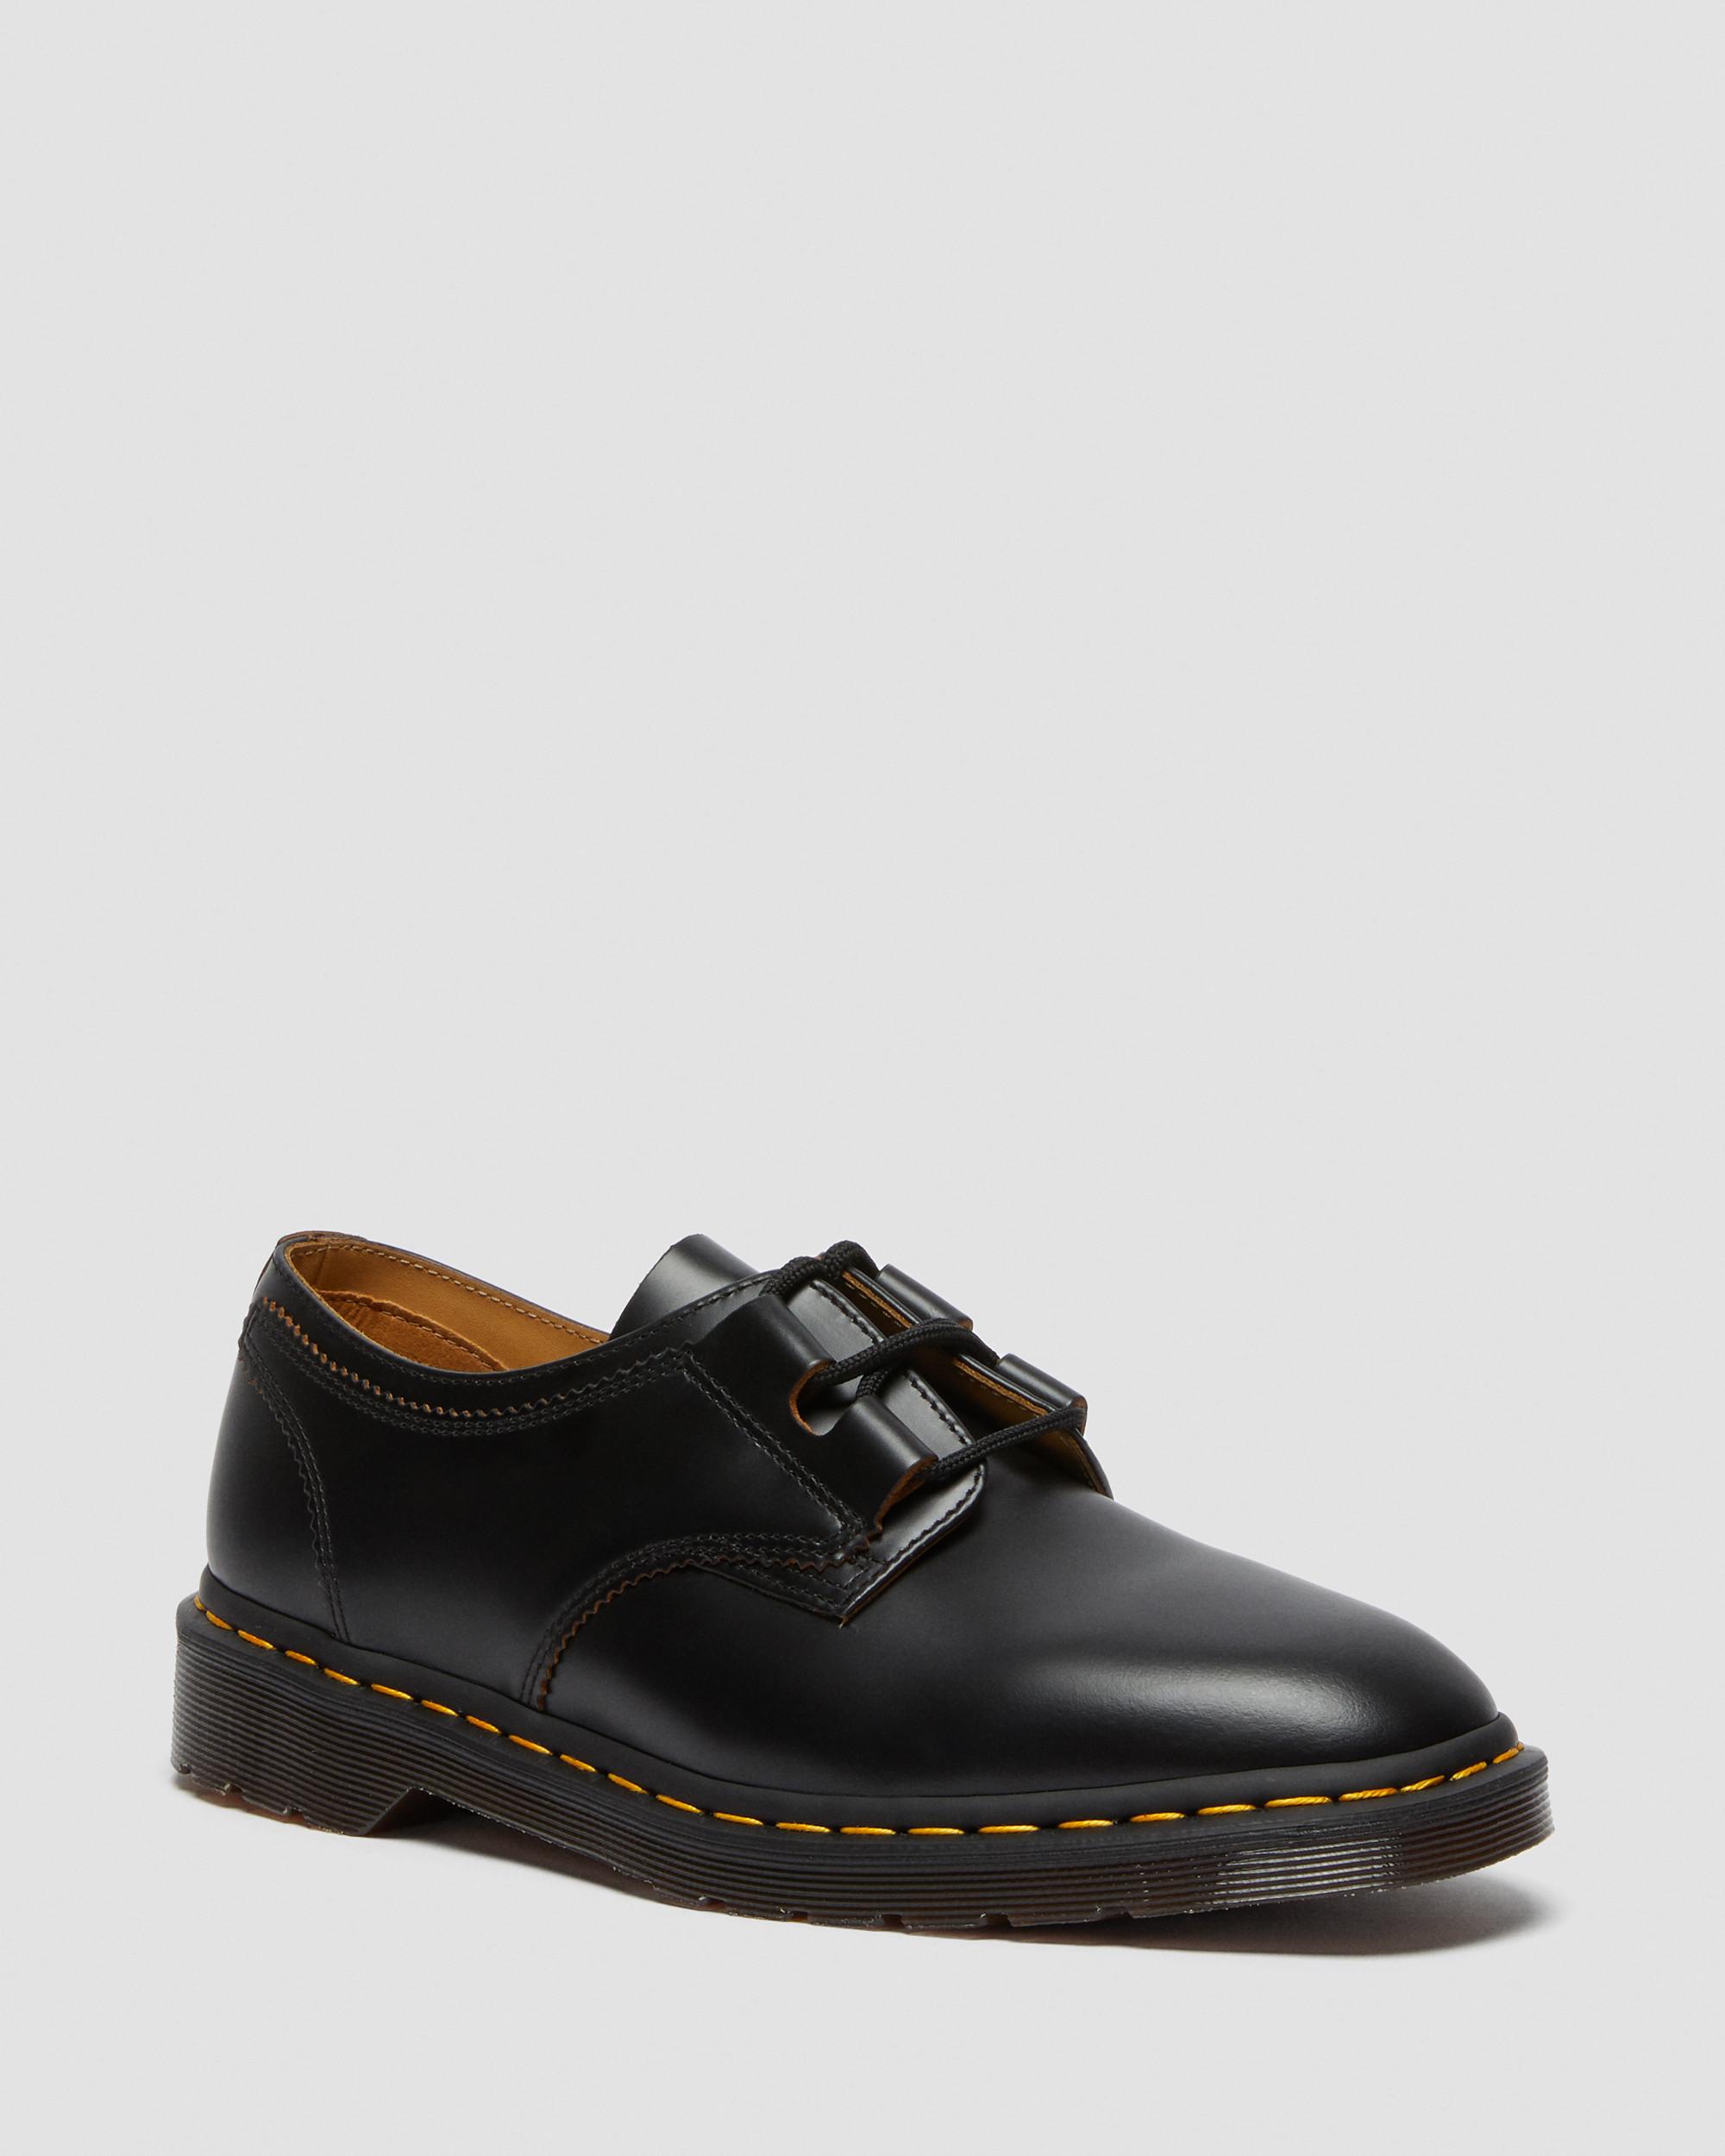 1461 Ghillie Leather Oxford Shoes in Black